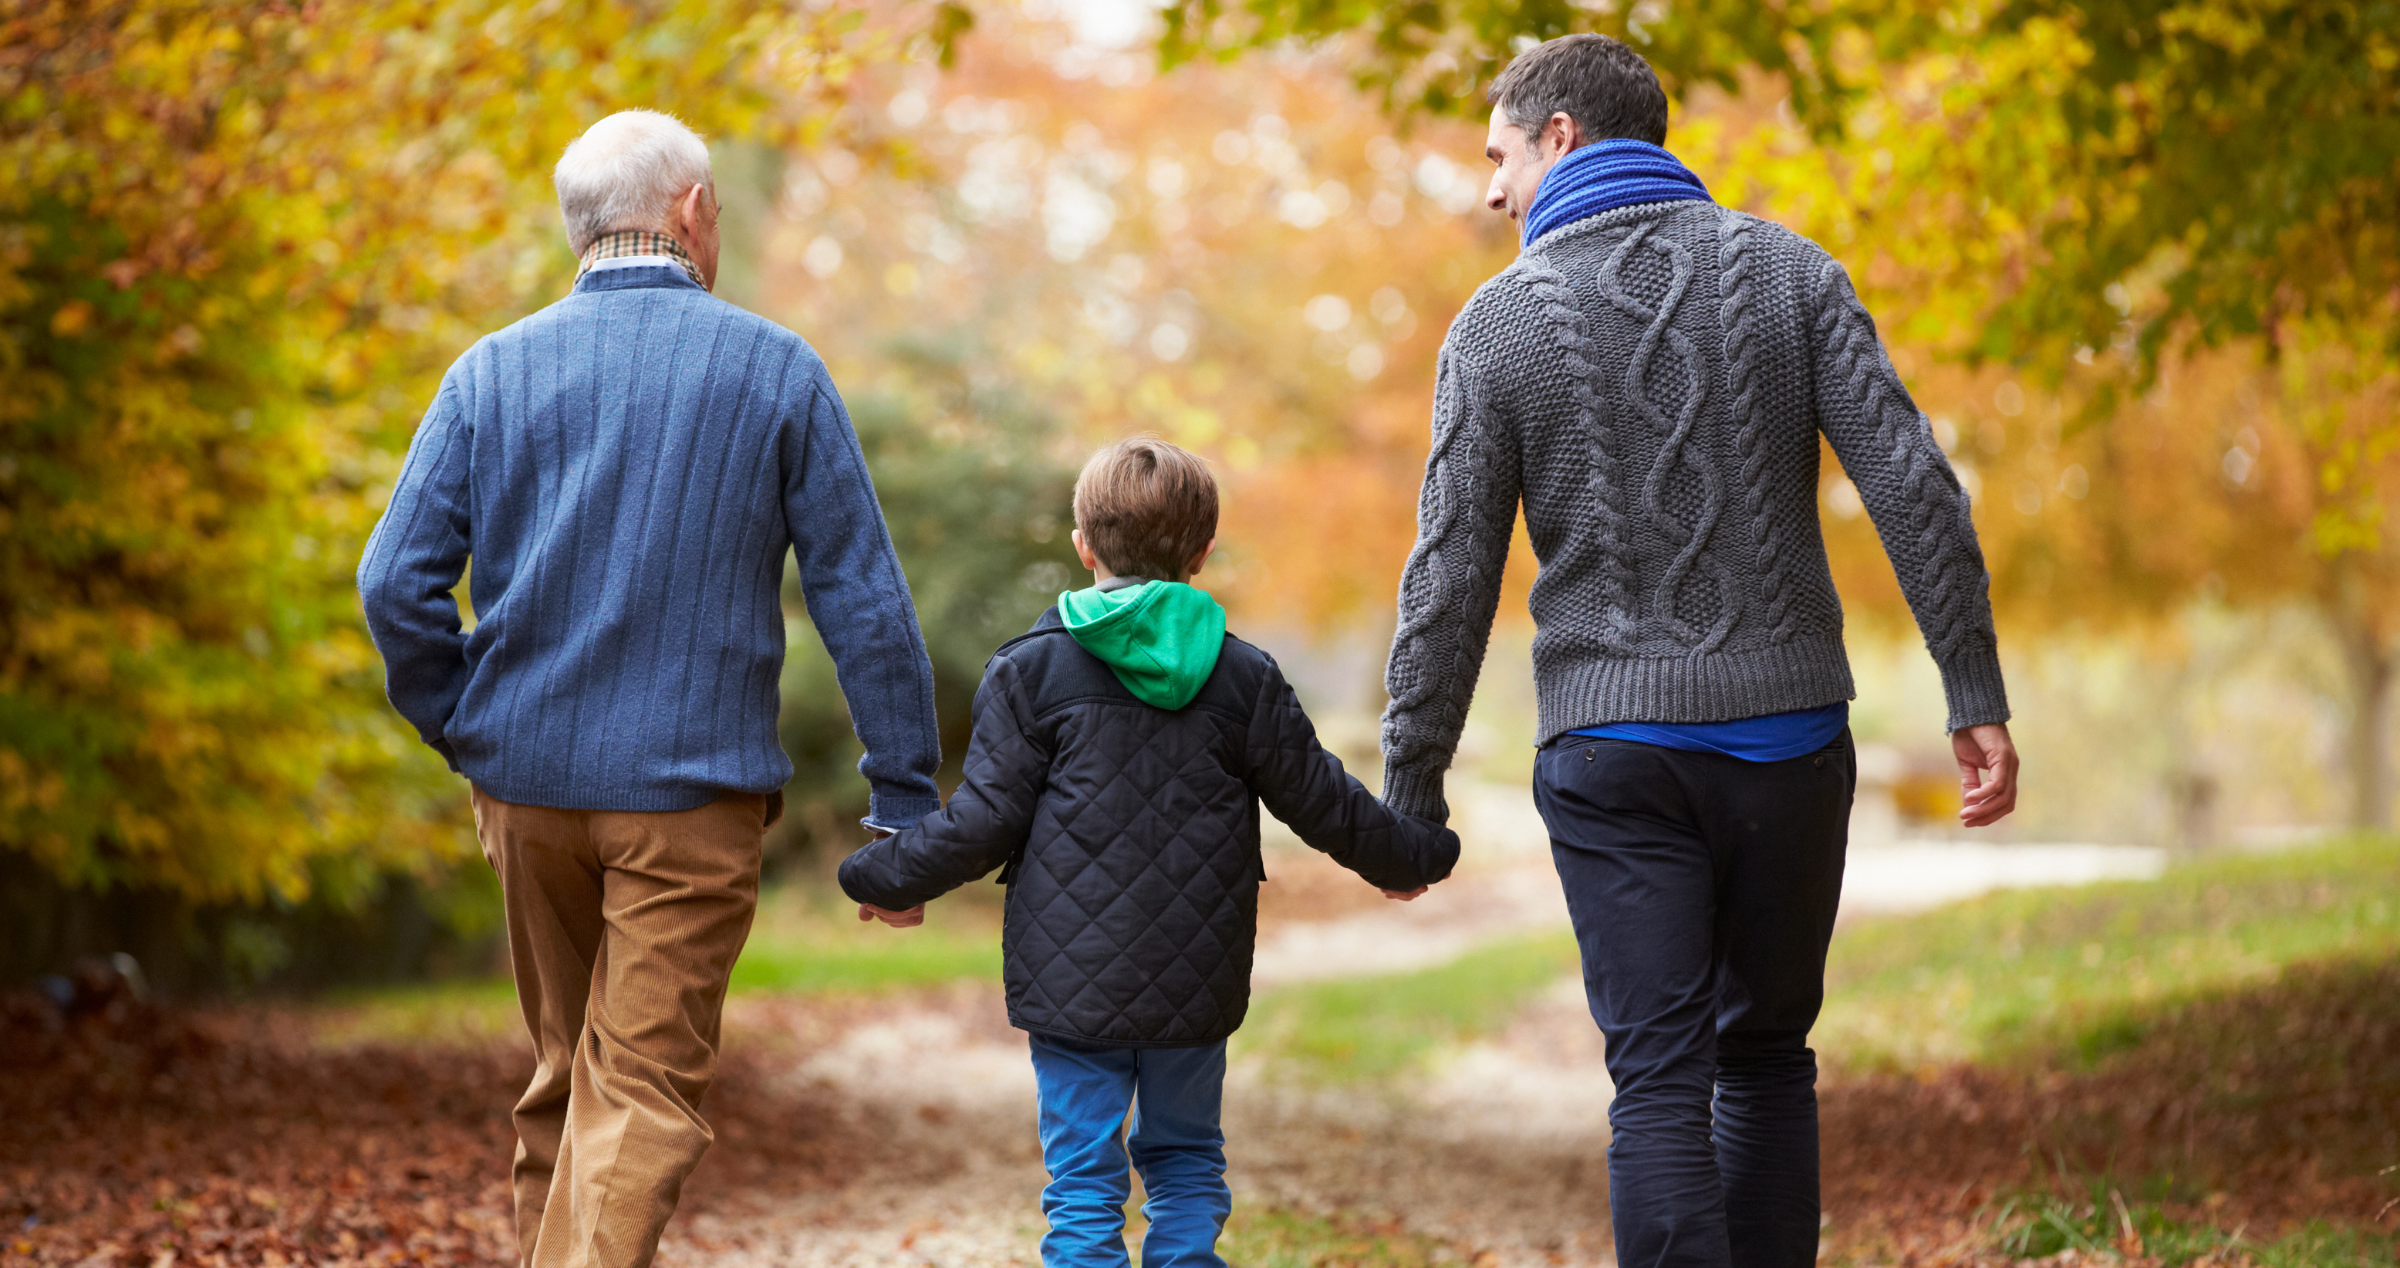 Image of three family members holding hands and walking in nature